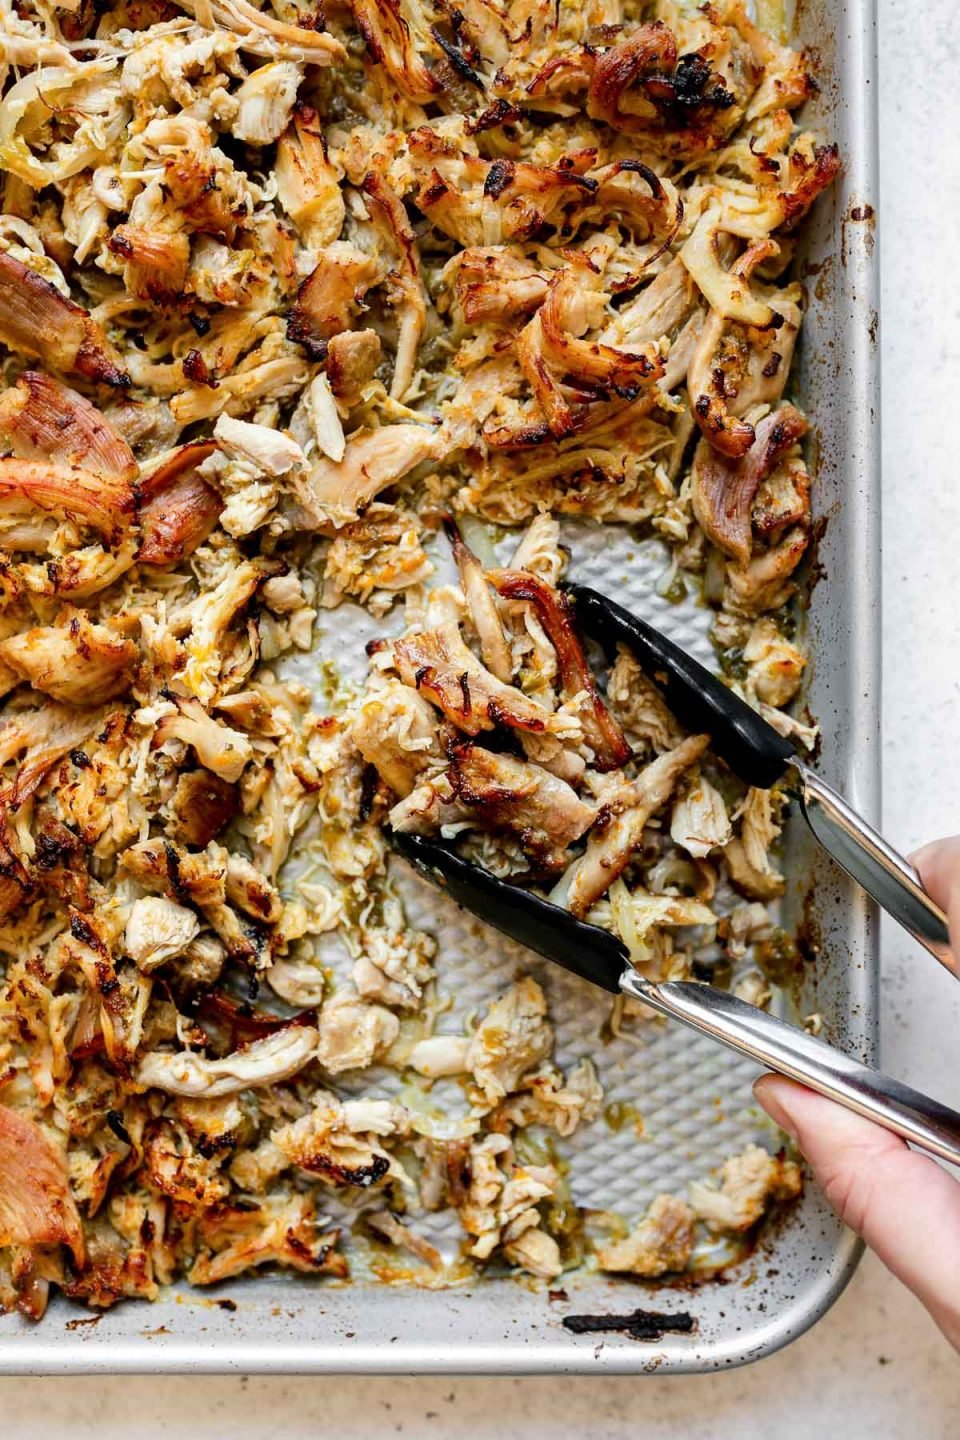 Shredded crispy chicken carnitas on a small silvery baking sheet, which sits atop a white surface. A woman's hand reaches into the frame with small tongs, scooping up some of the chicken carnitas.